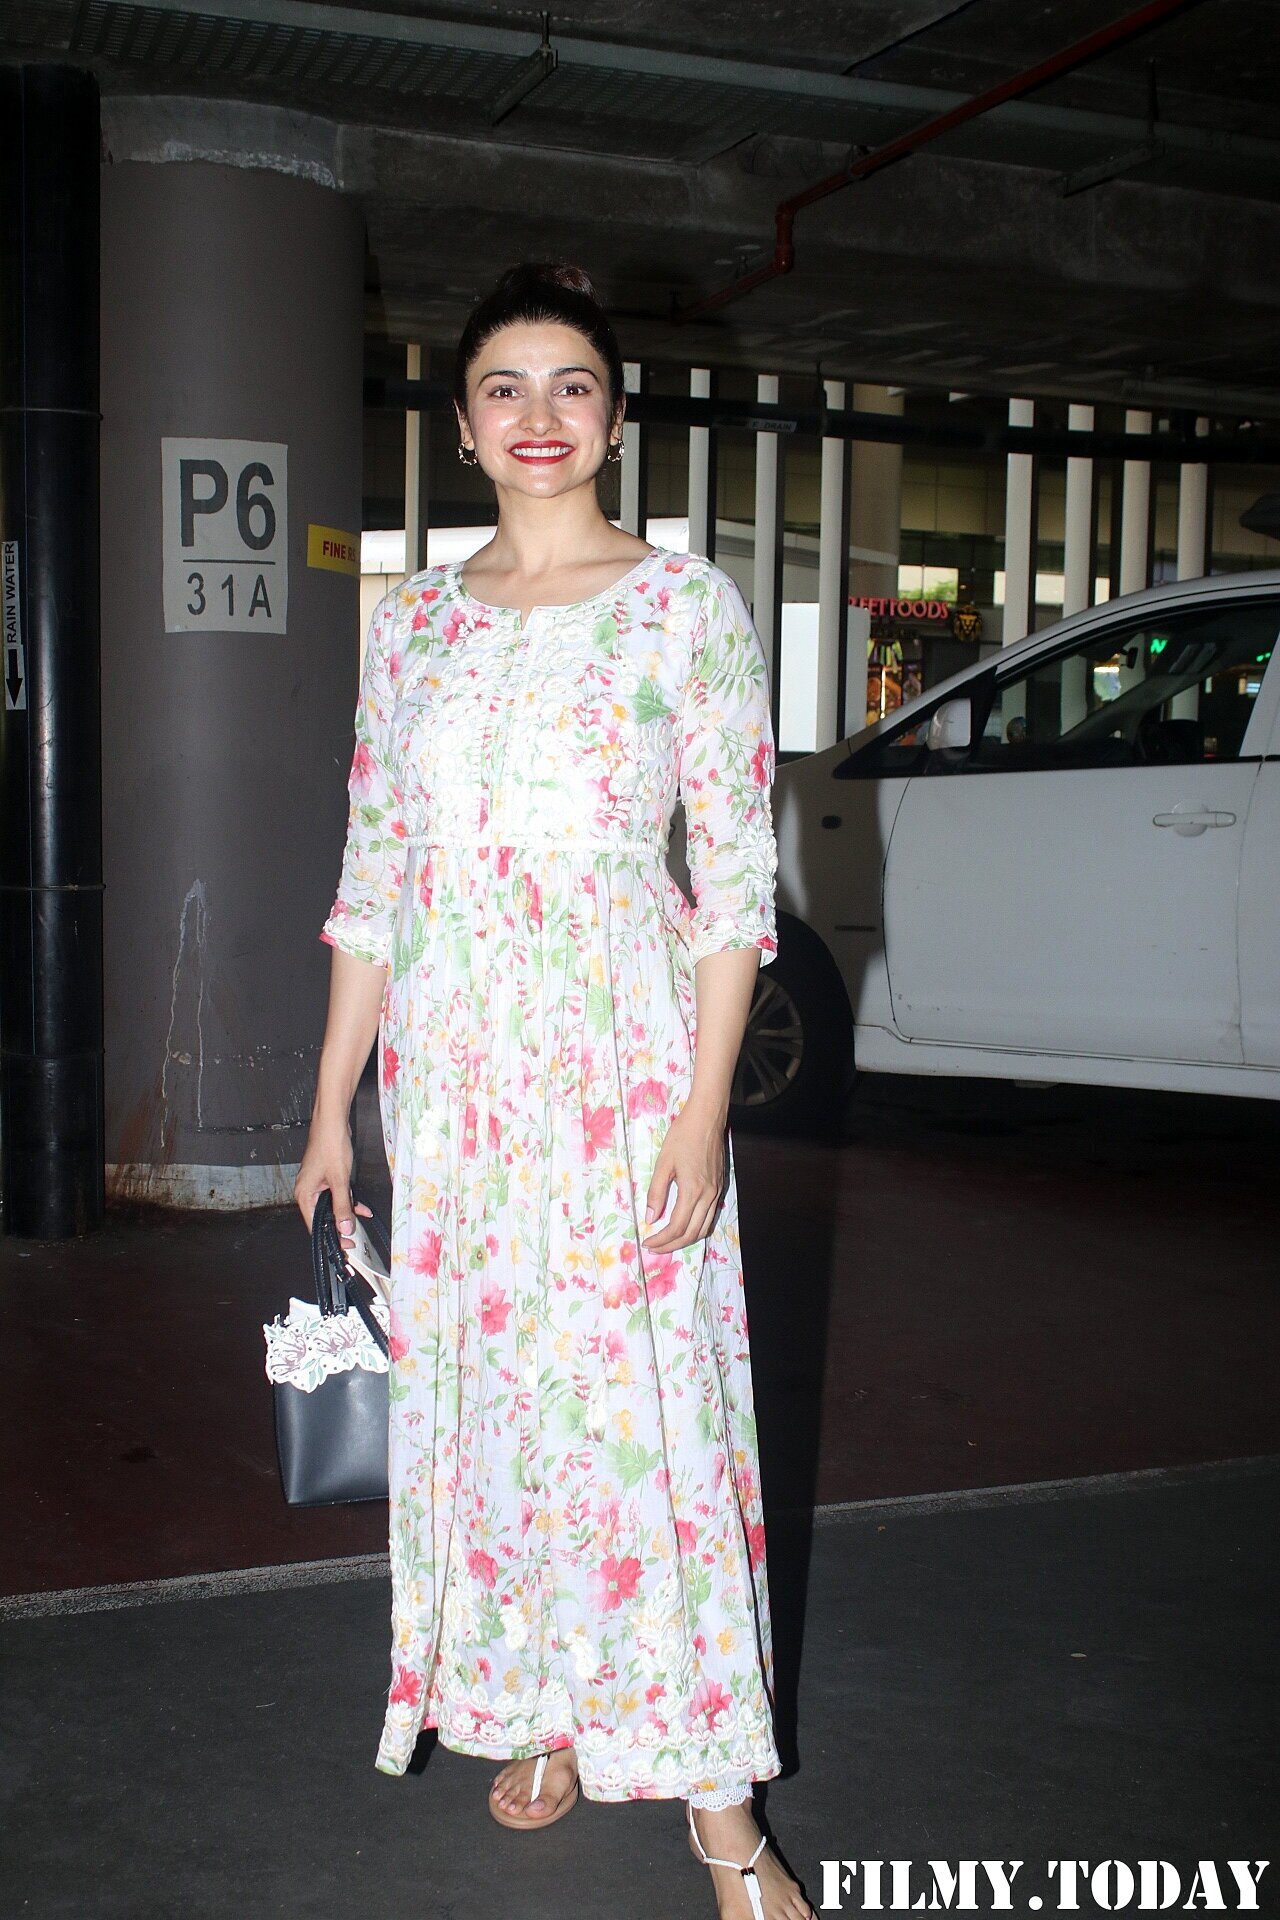 Prachi Desai - Photos: Celebs Spotted At Airport | Picture 1828626